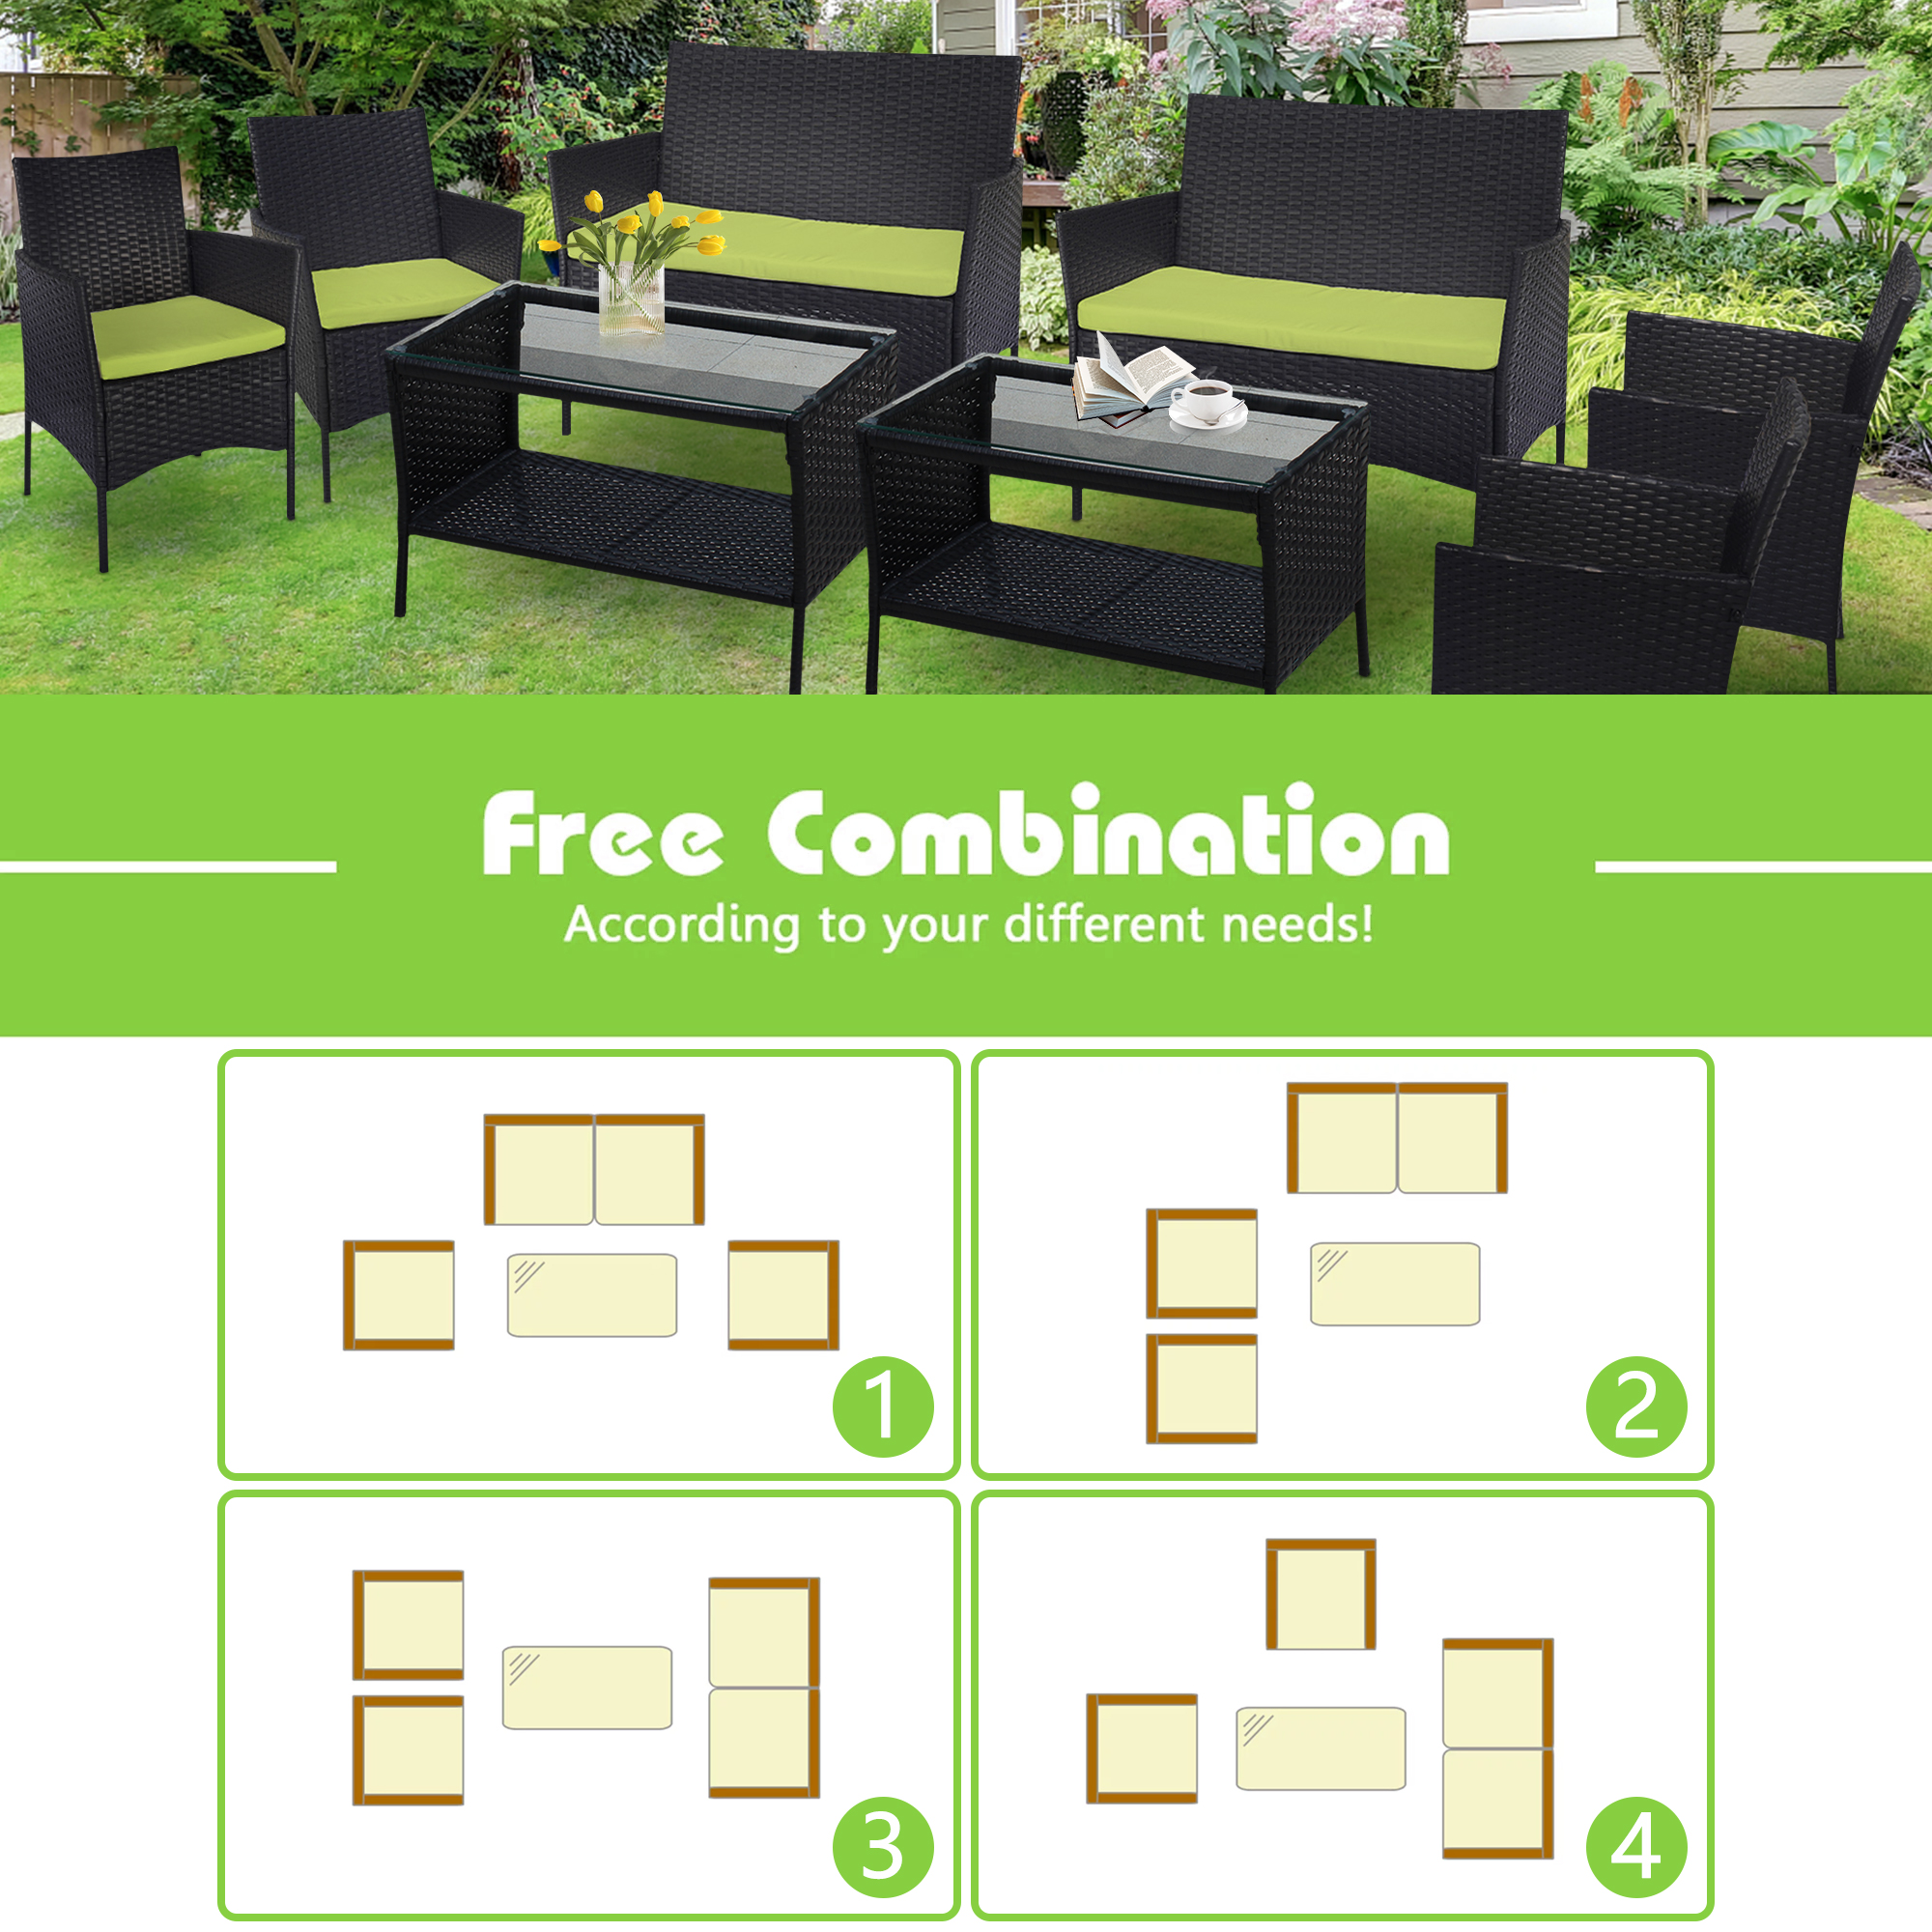 8-Piece Patio Outdoor Rattan Chair, Bistro Table Conversation Set with Soft Cushion & Glass Table, Patio Rattan Conversation Furniture Set, Leisure Furniture Set for Garden Backyard Balcony, T204 - image 5 of 9